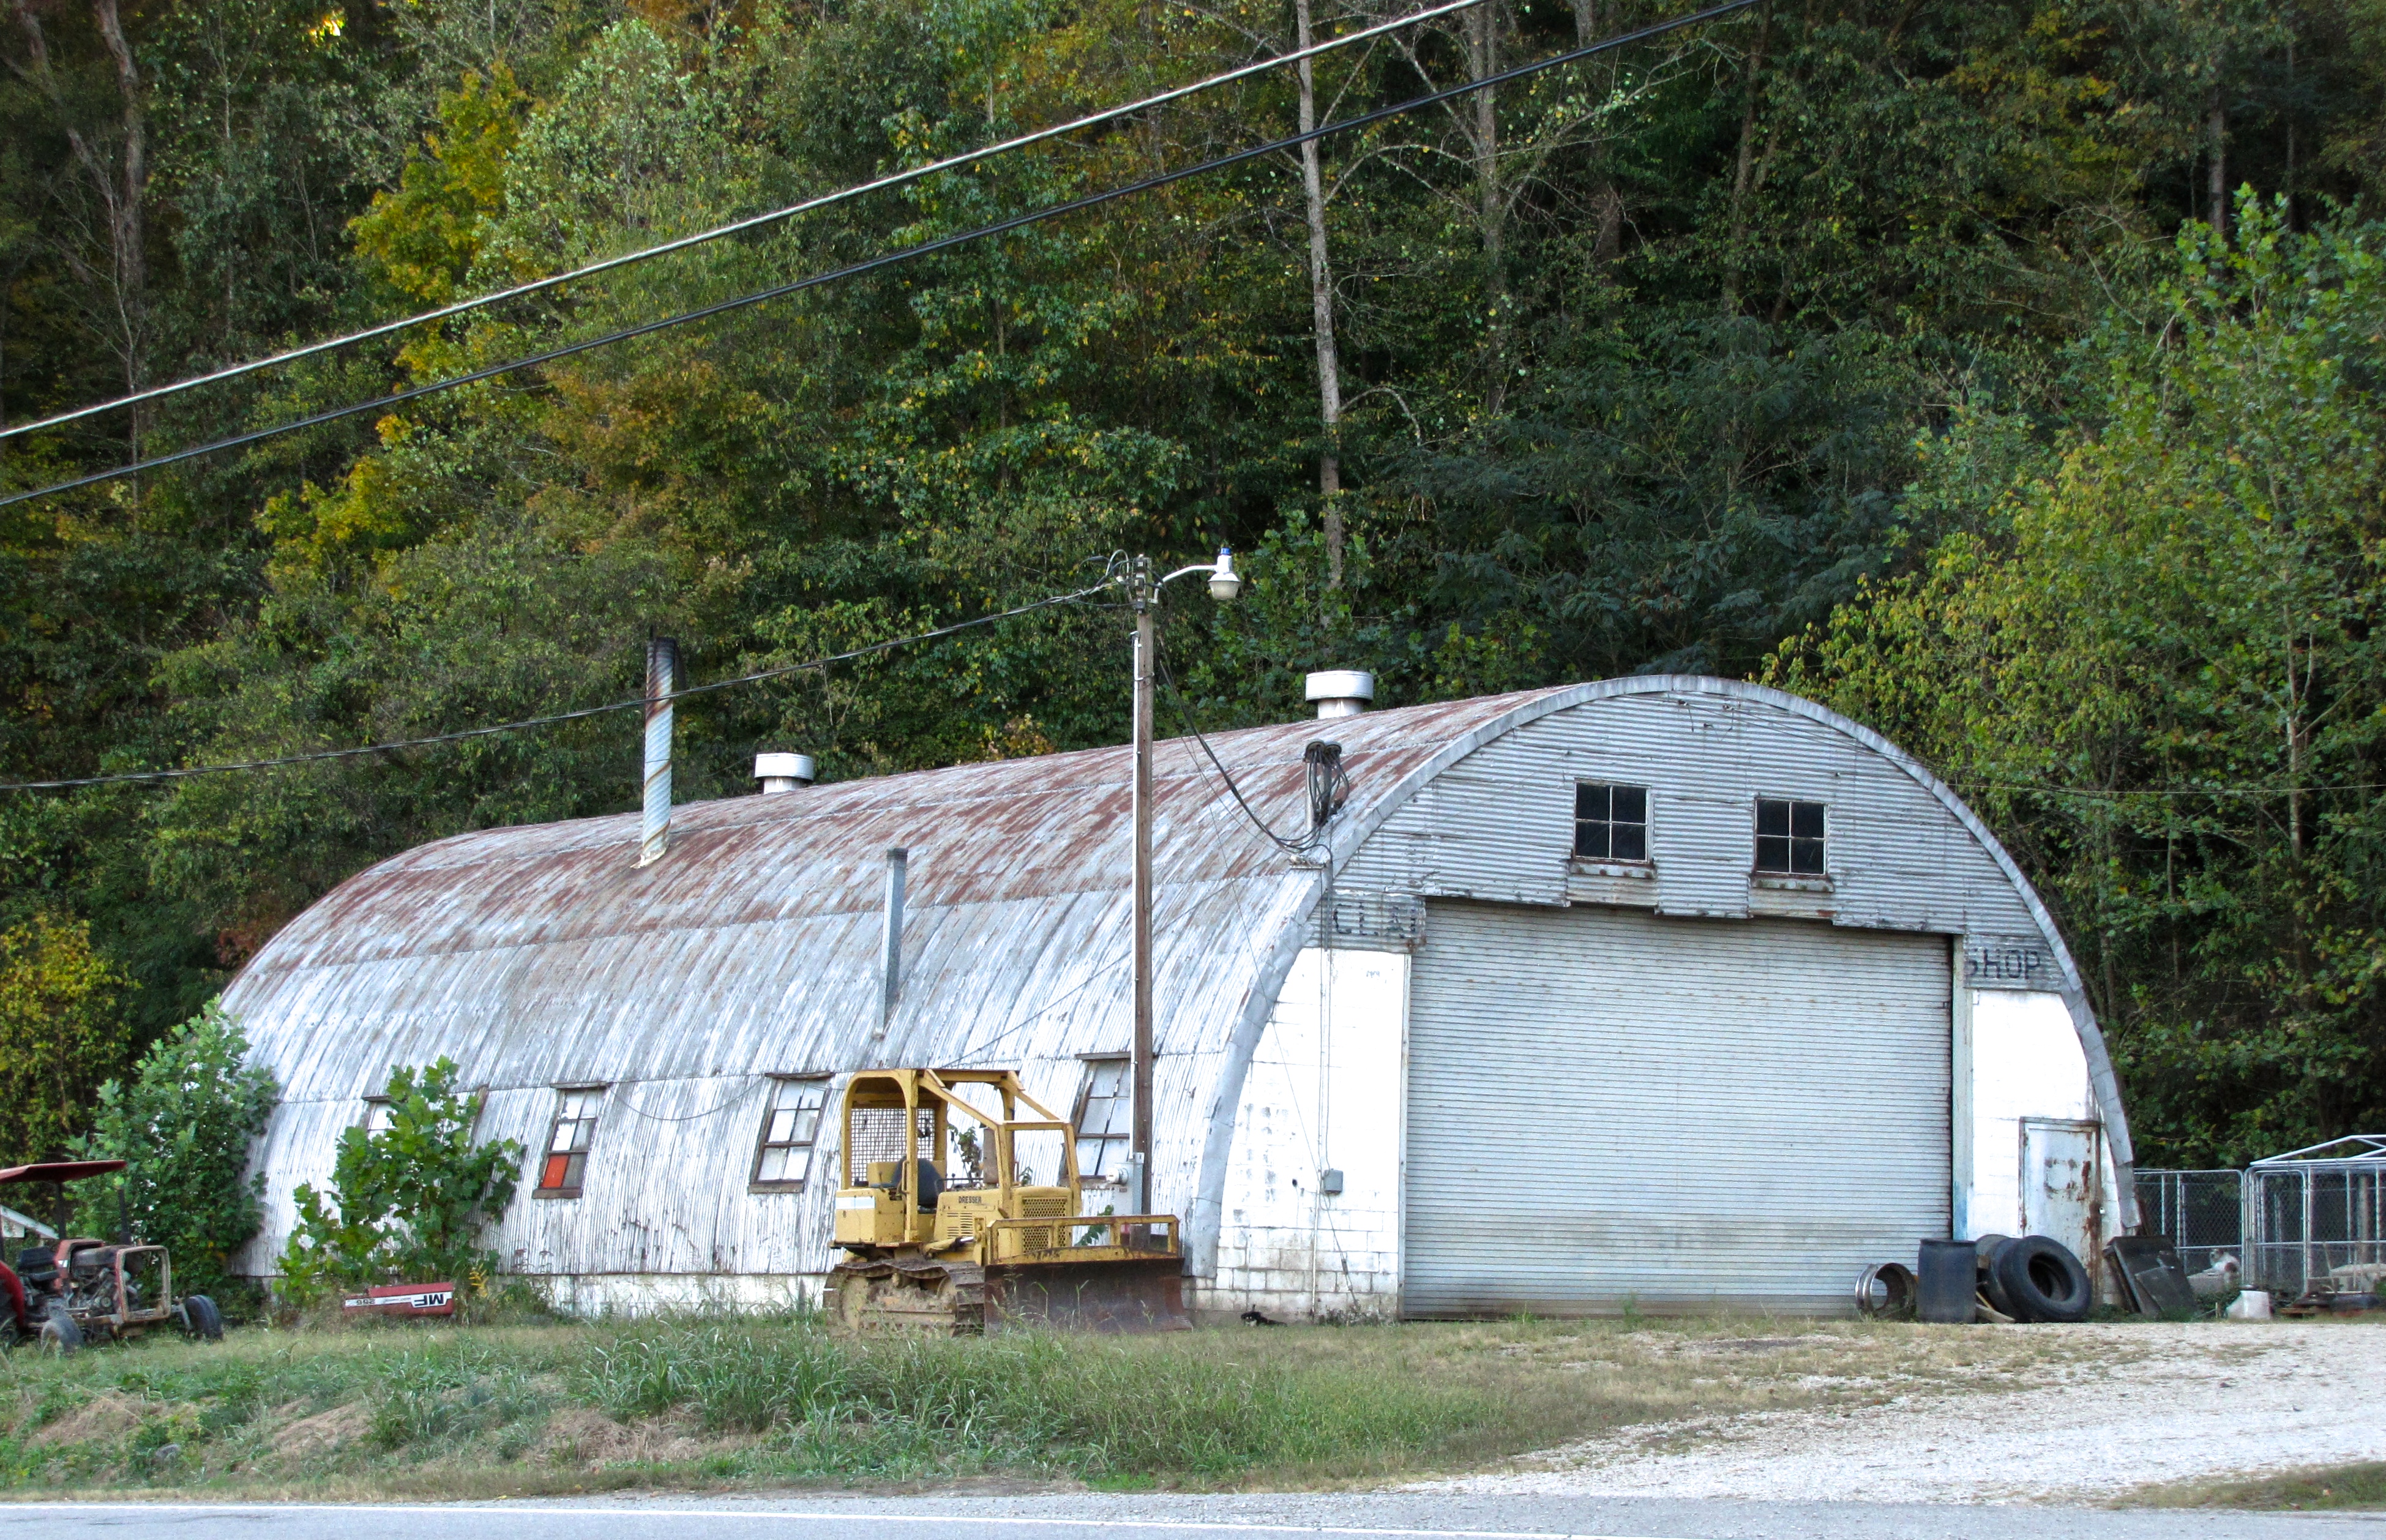 quonset hut in About Us, MO